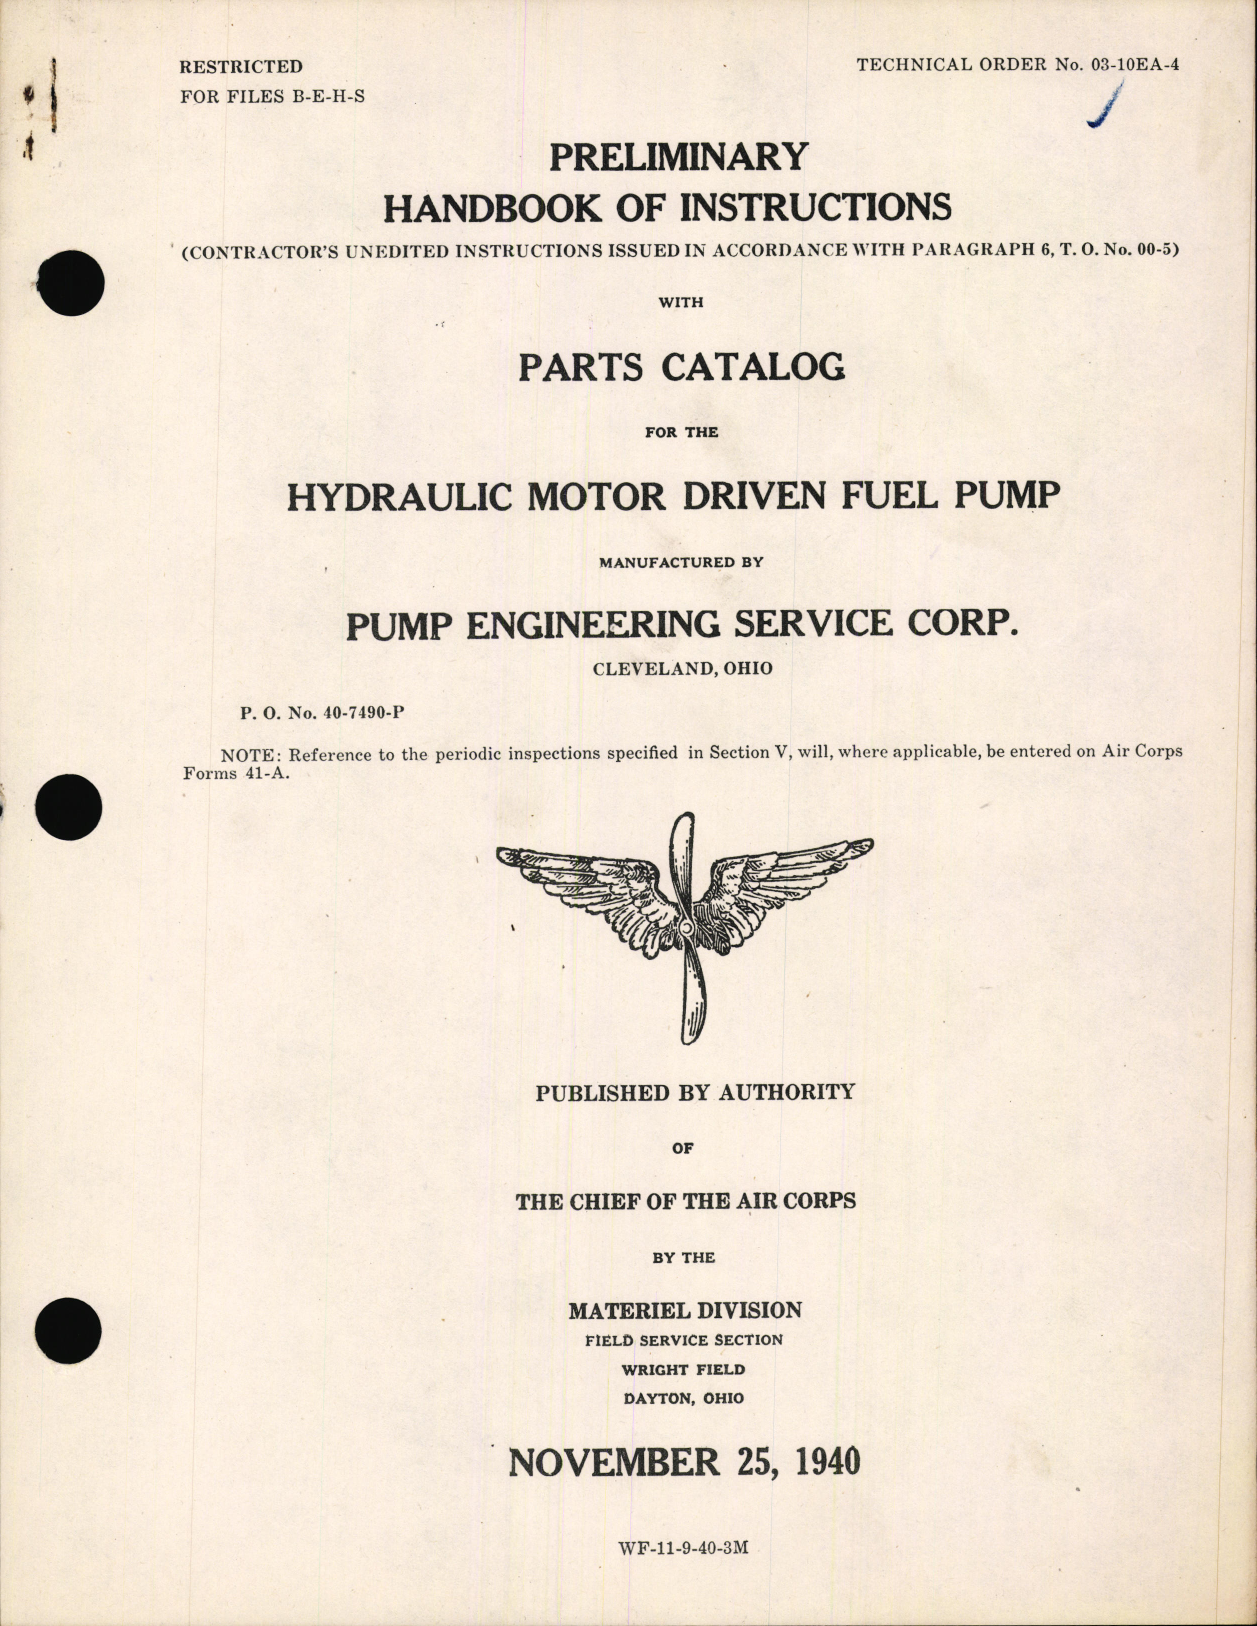 Sample page 1 from AirCorps Library document: Preliminary Handbook of Instructions with Parts Catalog for the Hydraulic Motor Driven Fuel Pump